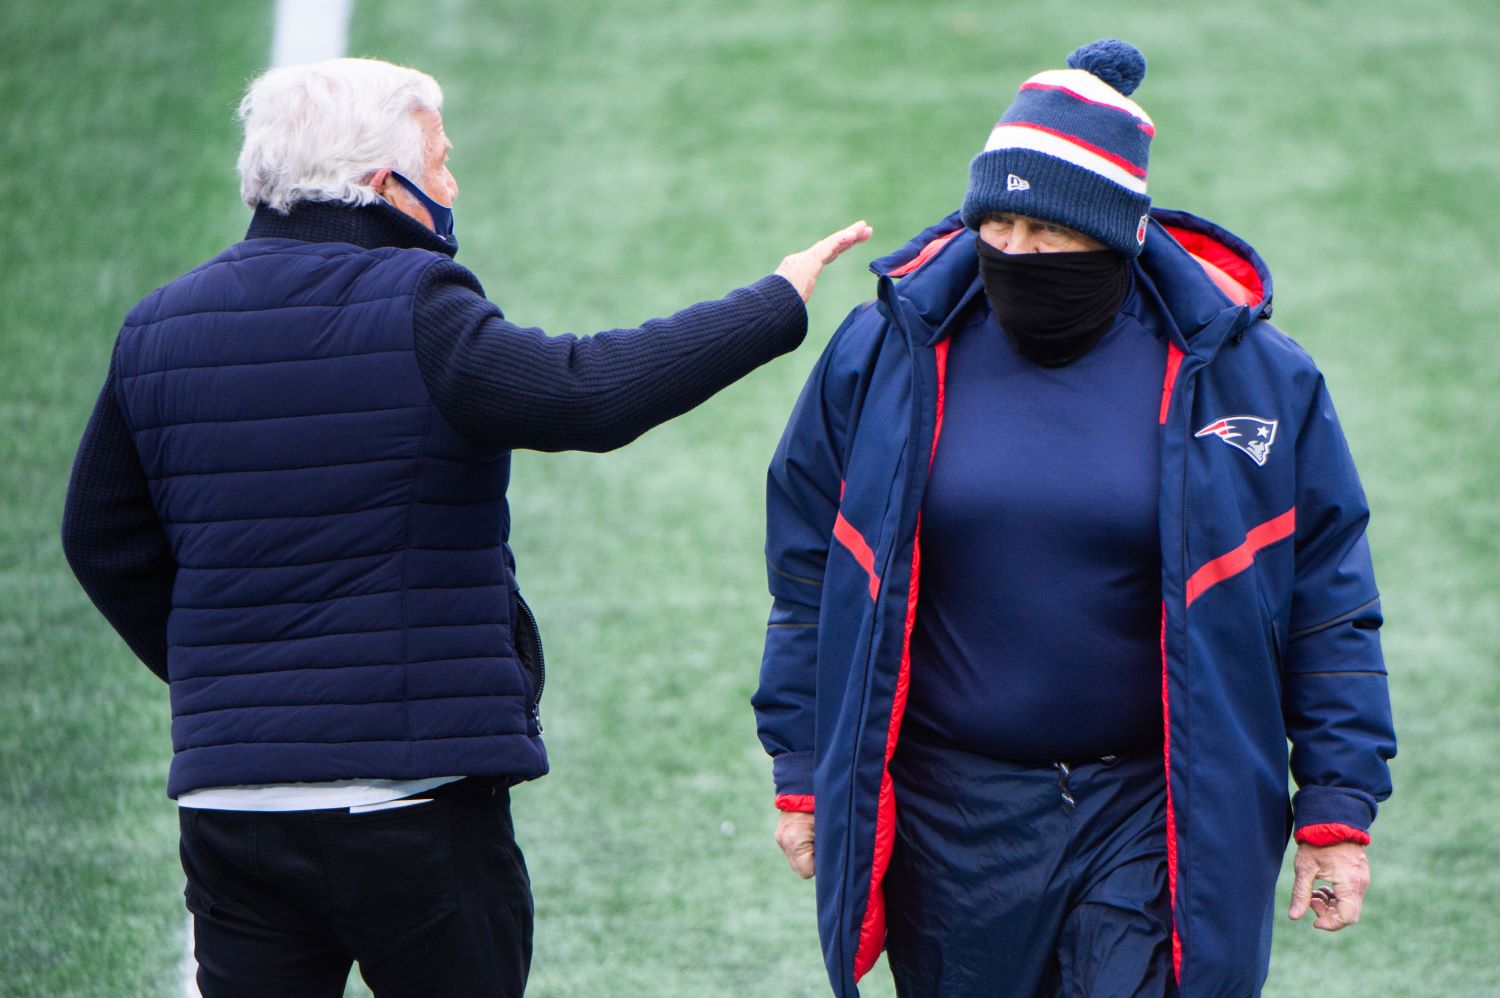 Bill Belichick is stealing more than $20 million a year from Robert Kraft and the Patriots if the latest report about his annual salary is actually true.